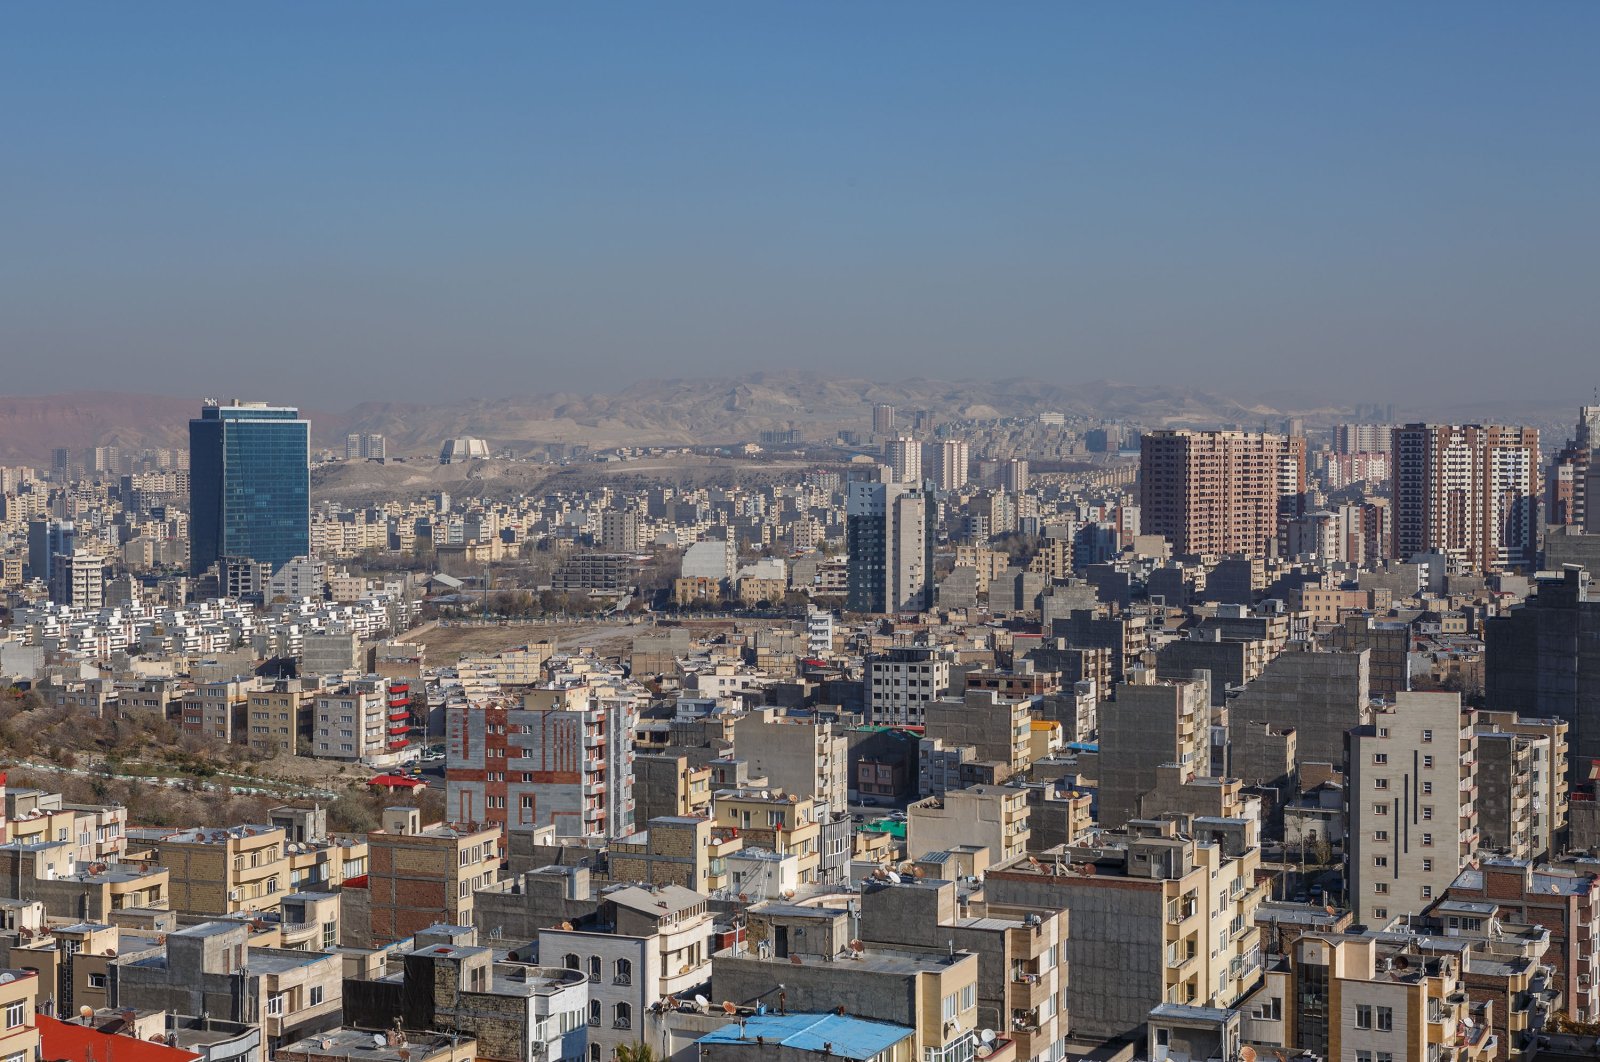 View of Tabriz, capital city of East Azerbaijan Province in Iran. (Getty Images)